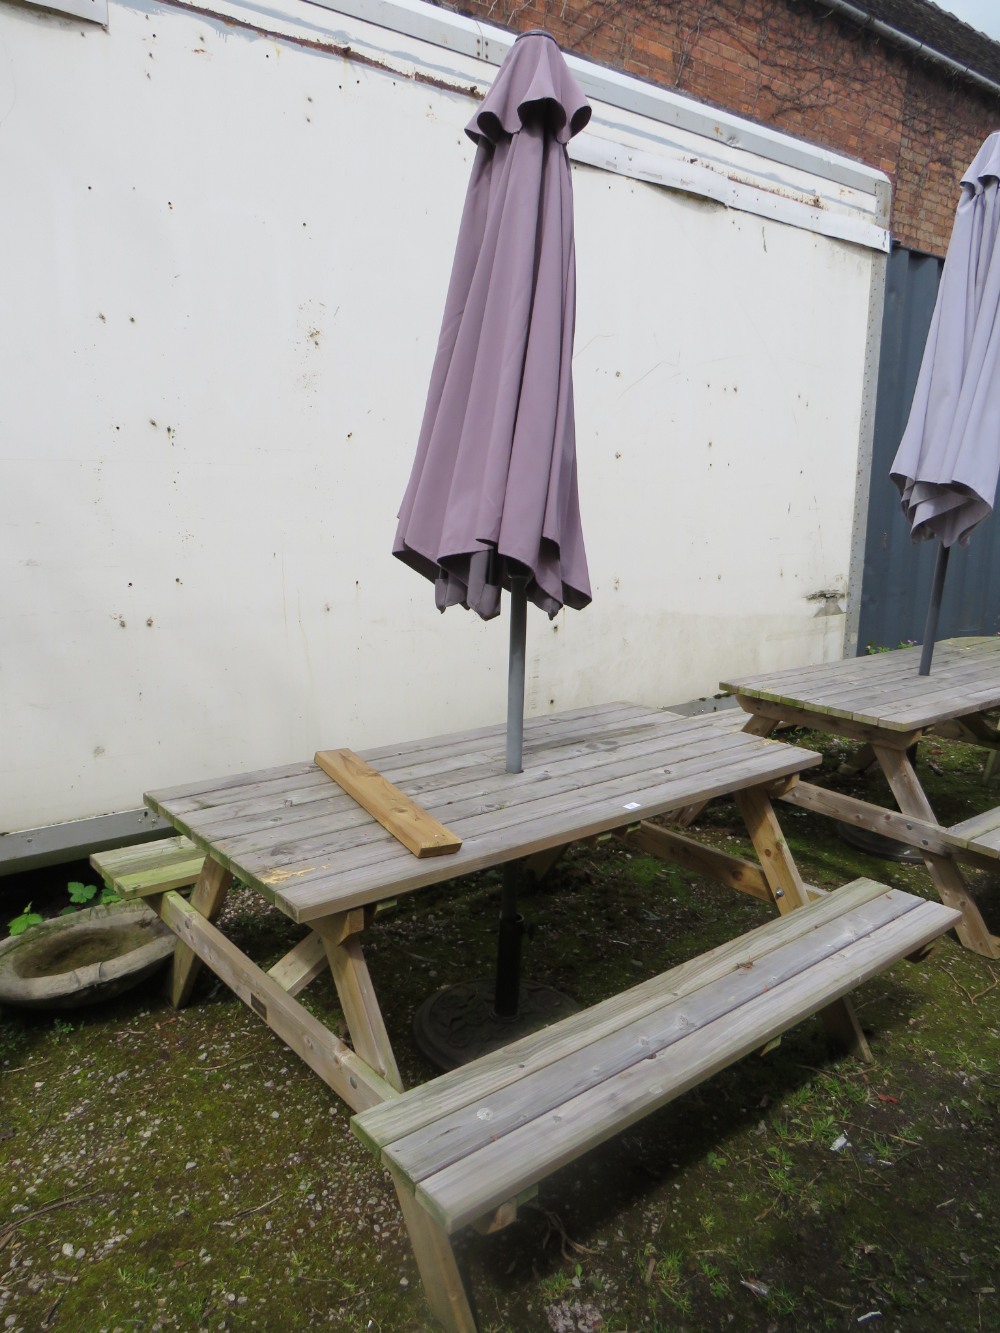 A ROWINSON WOODEN GARDEN / PATIO TABLE WITH PARASOL AND STAND - Image 6 of 6